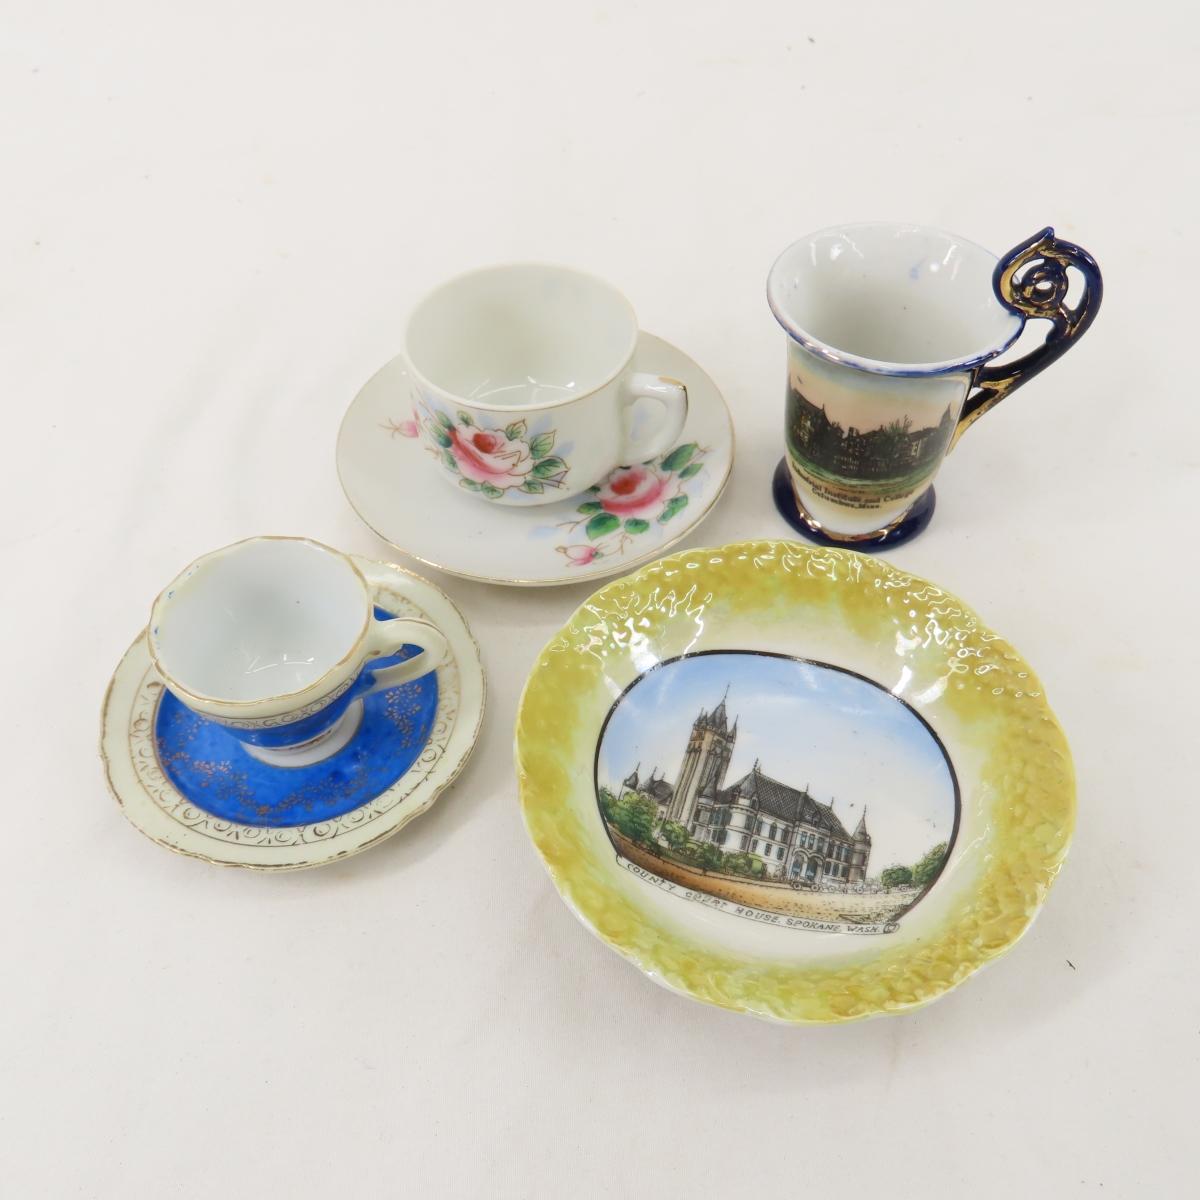 Made in occupied Japan demitasse and teacups